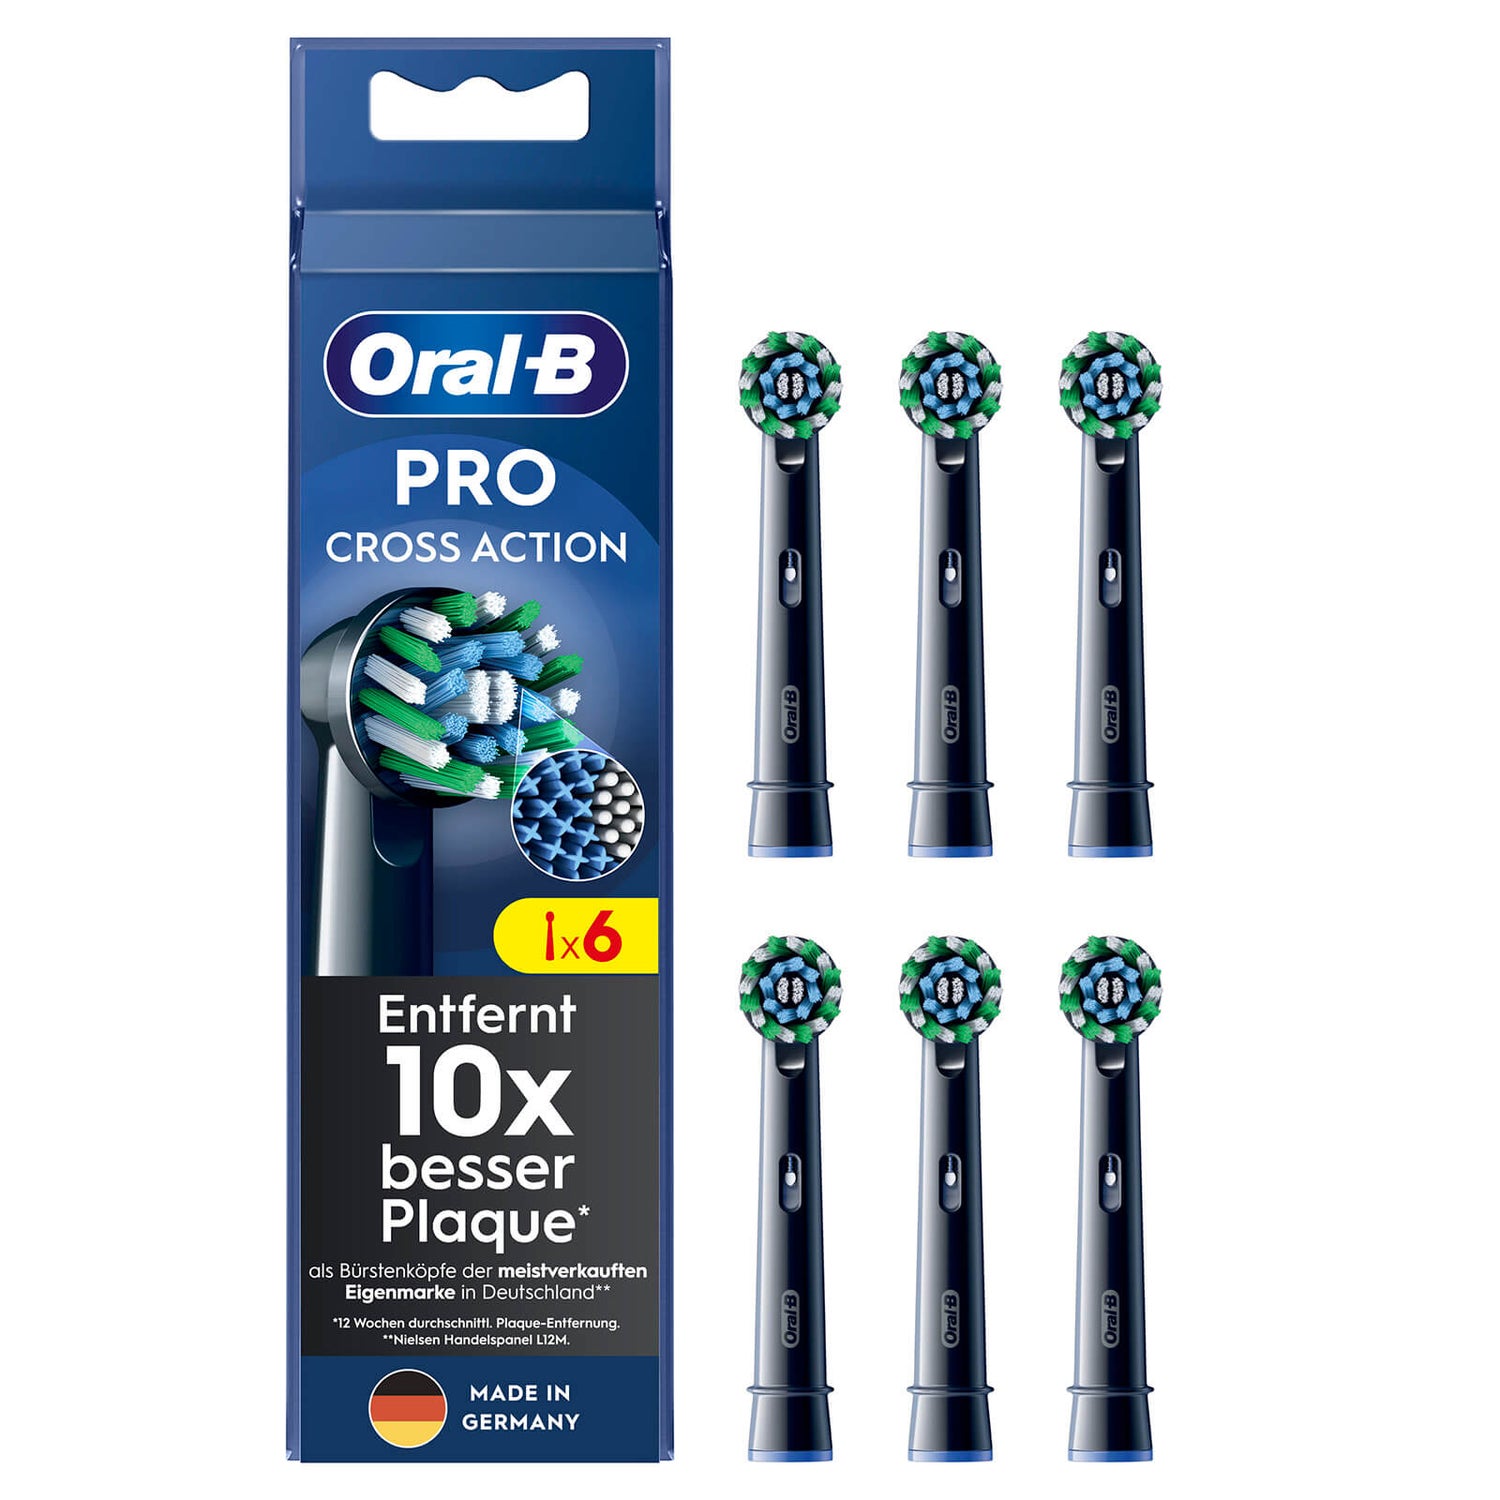 Oral-B Pro Toothbrush Heads Xfilament 6 count